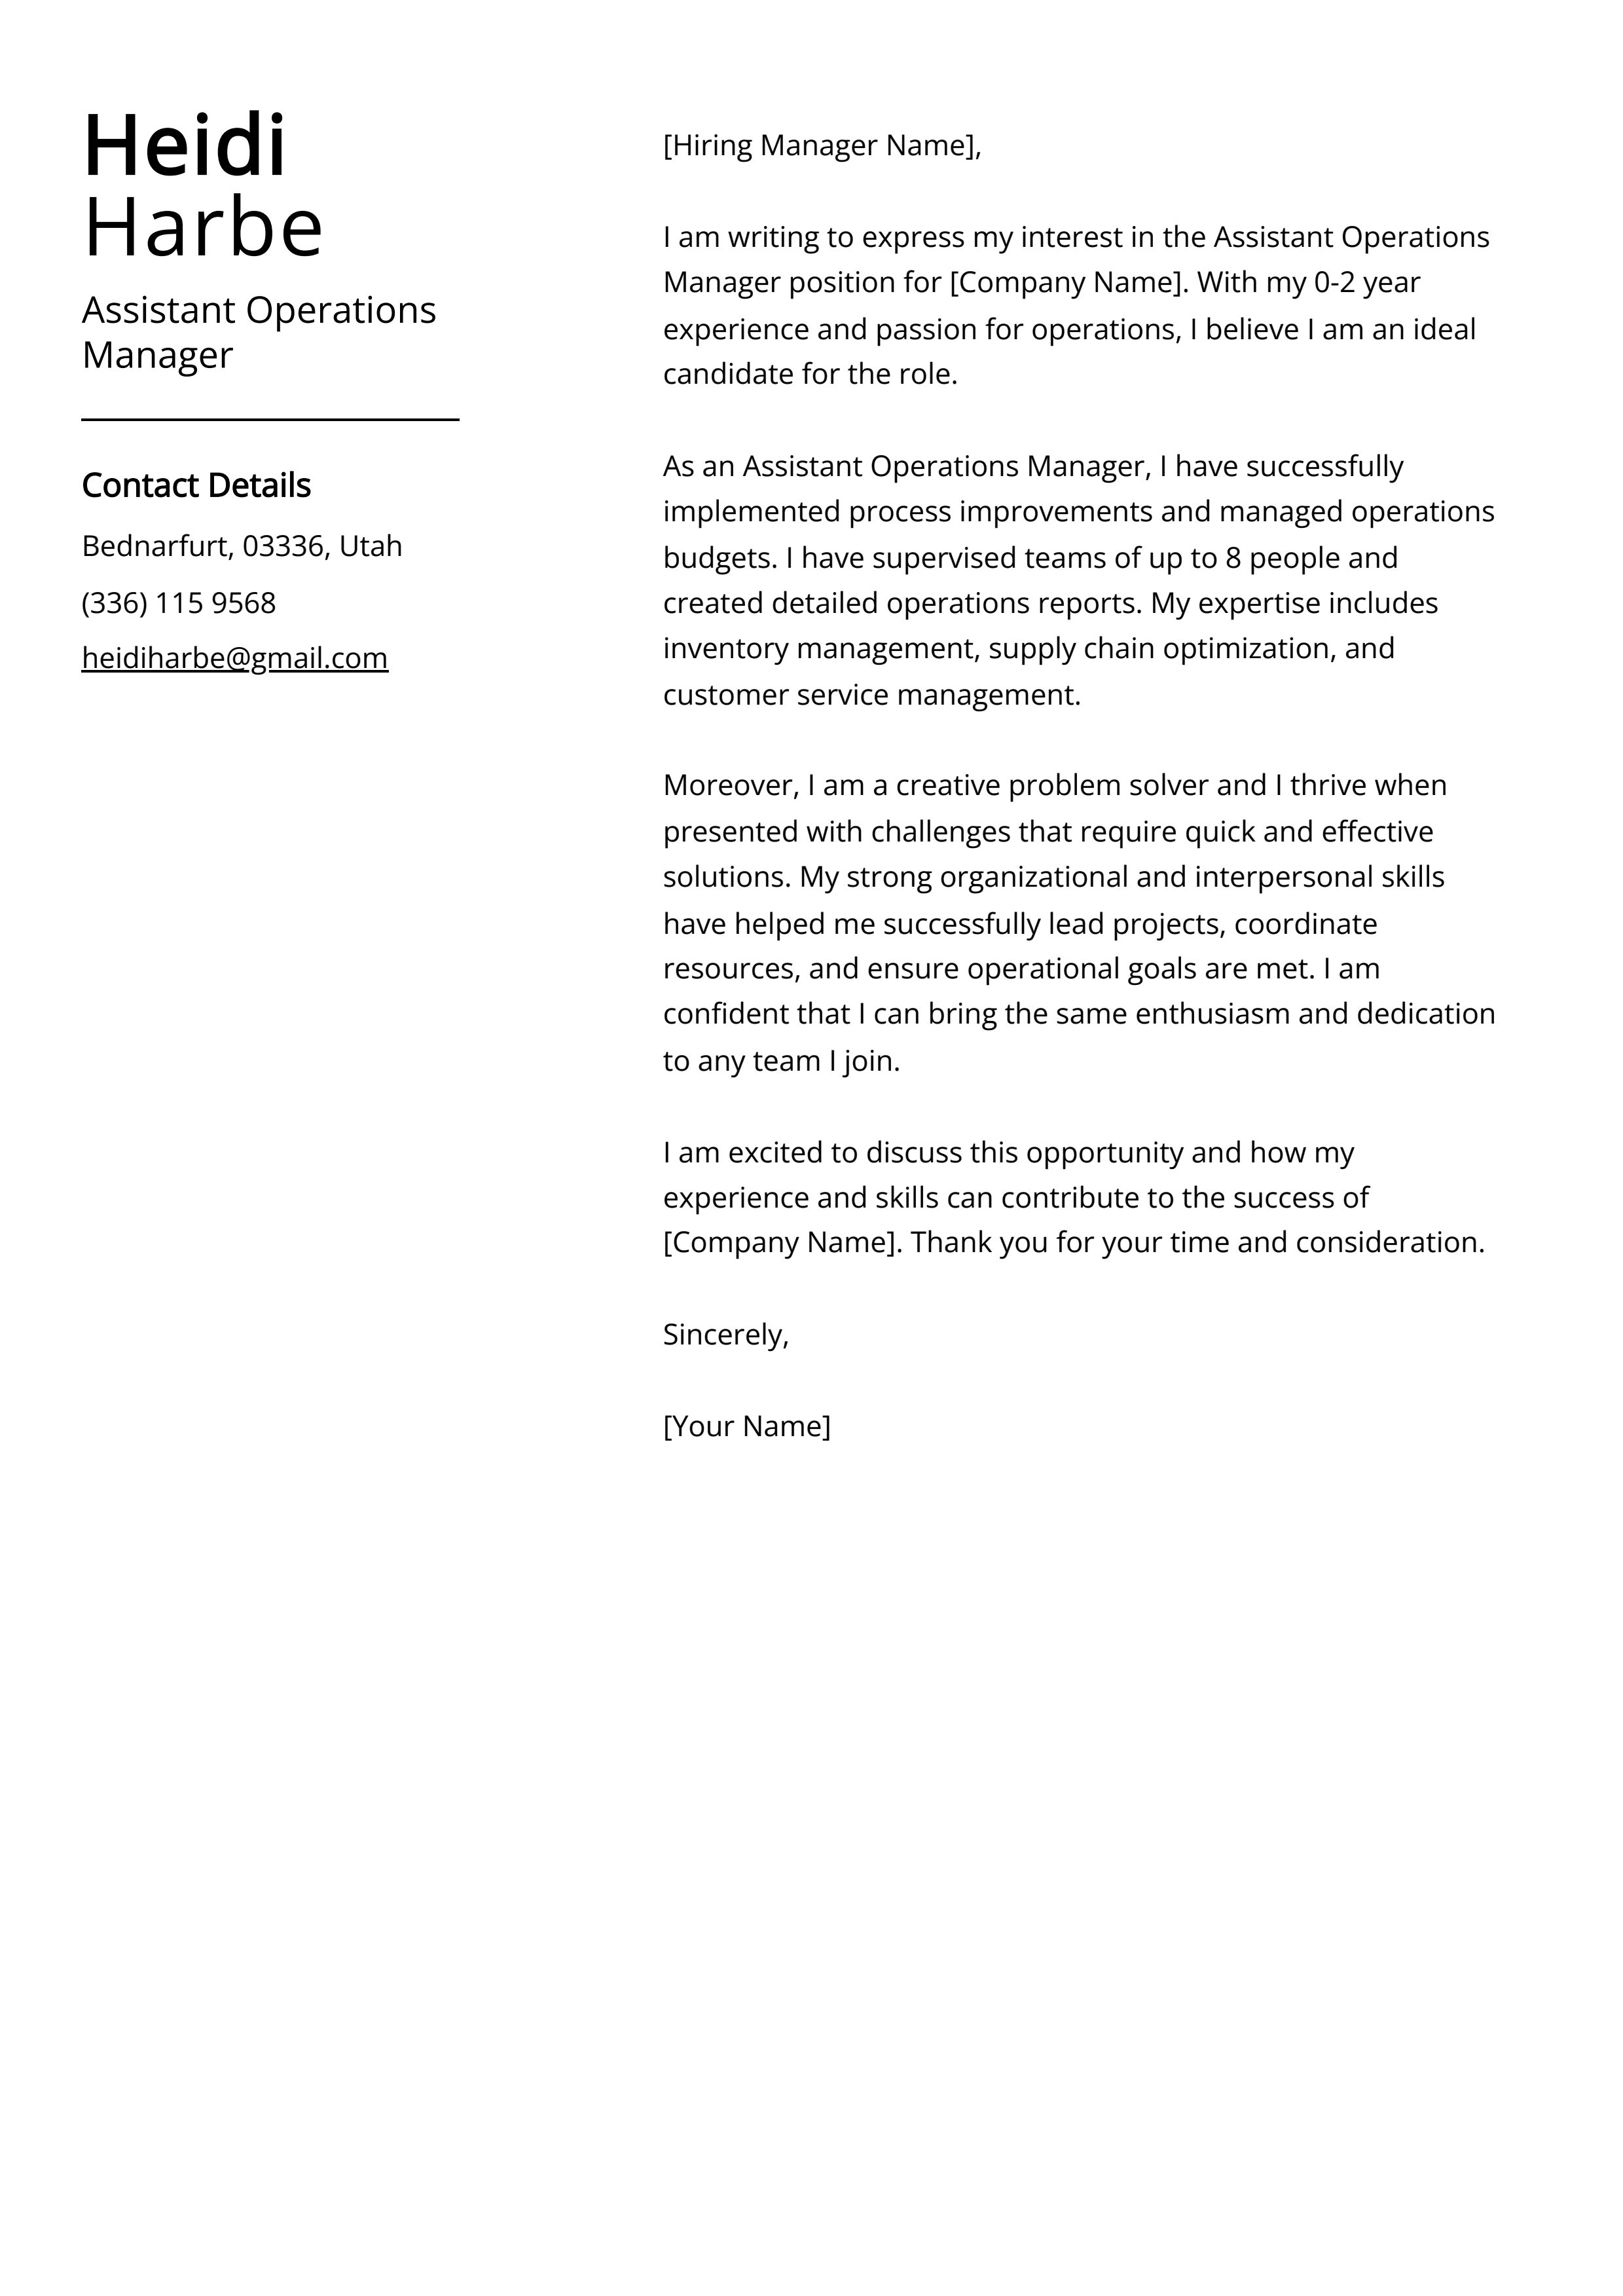 Assistant Operations Manager Cover Letter Example